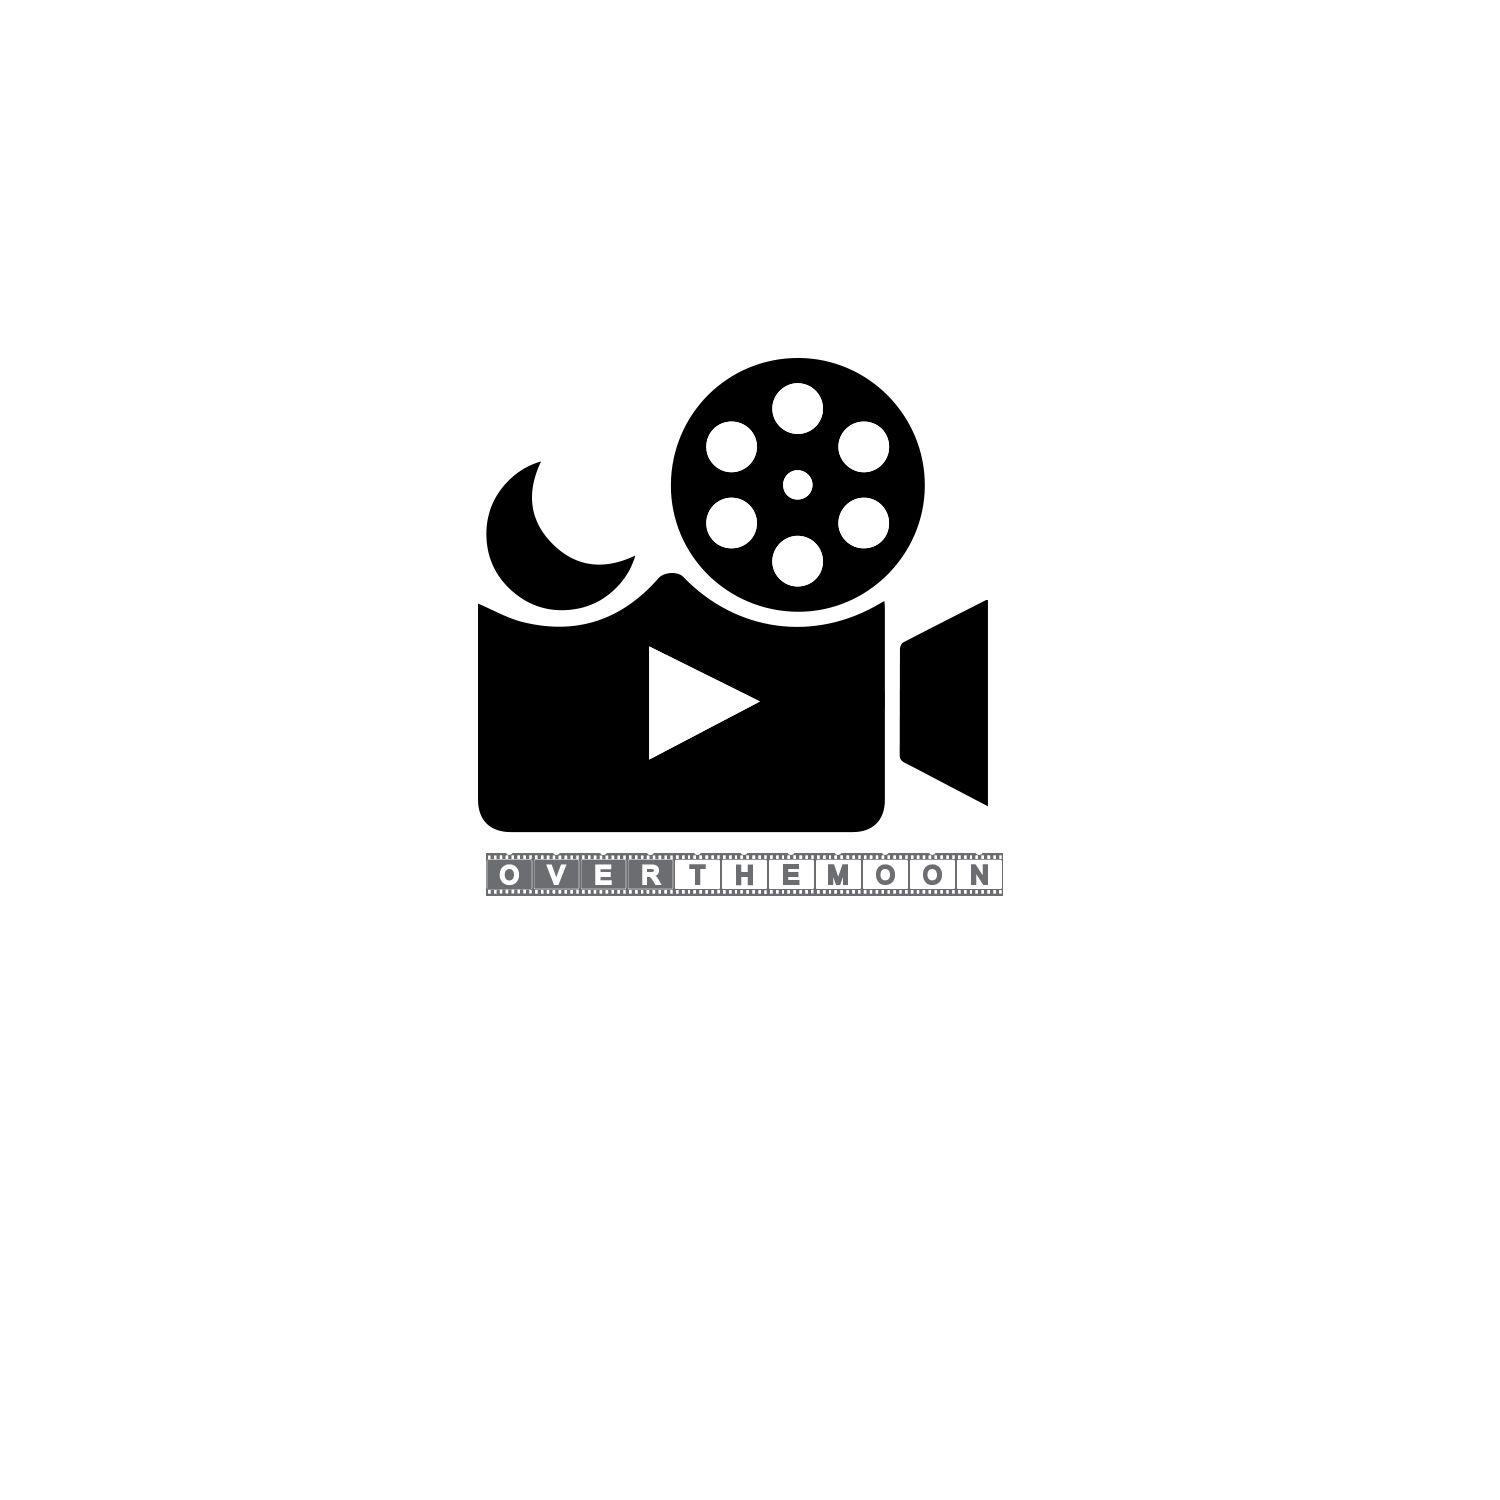 Production Logo - Professional, Serious, Movie Production Logo Design for OVER THE ...